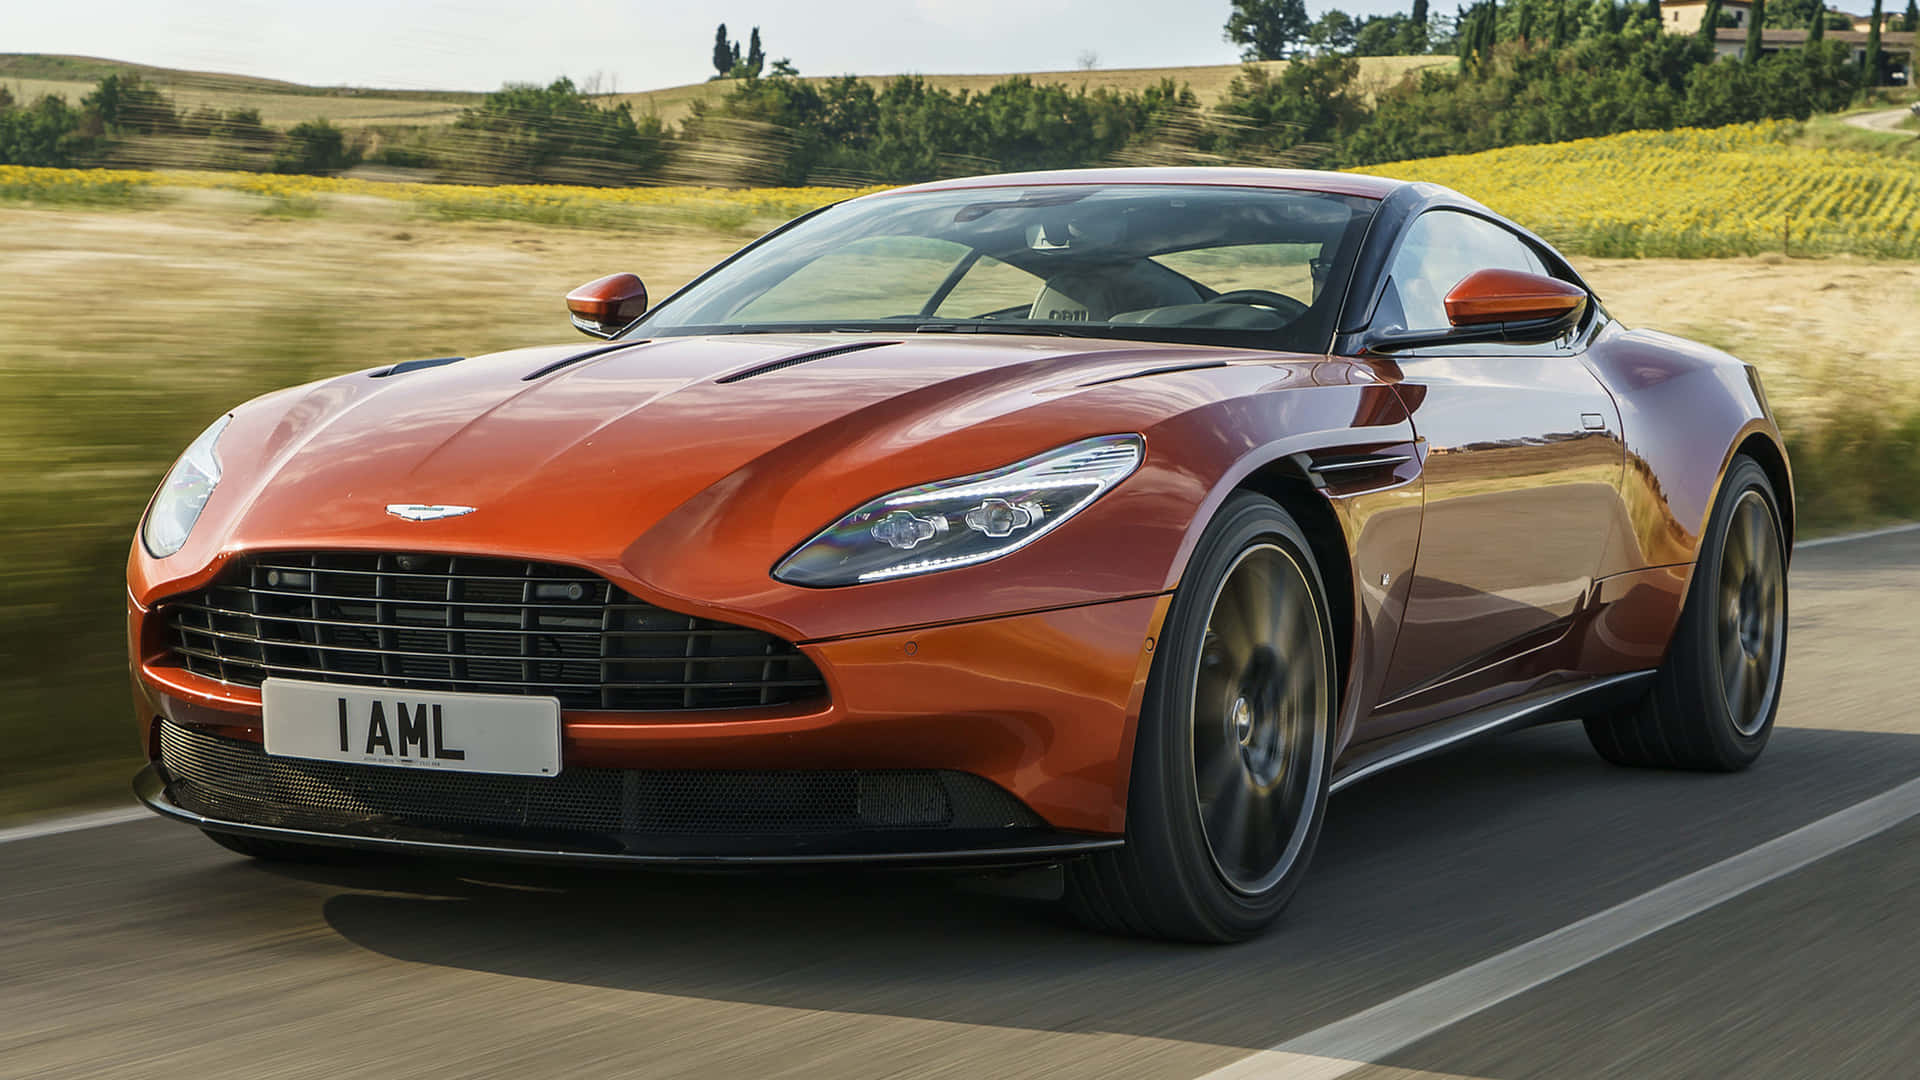 Sleek and powerful Aston Martin DB11 in motion on an open road Wallpaper